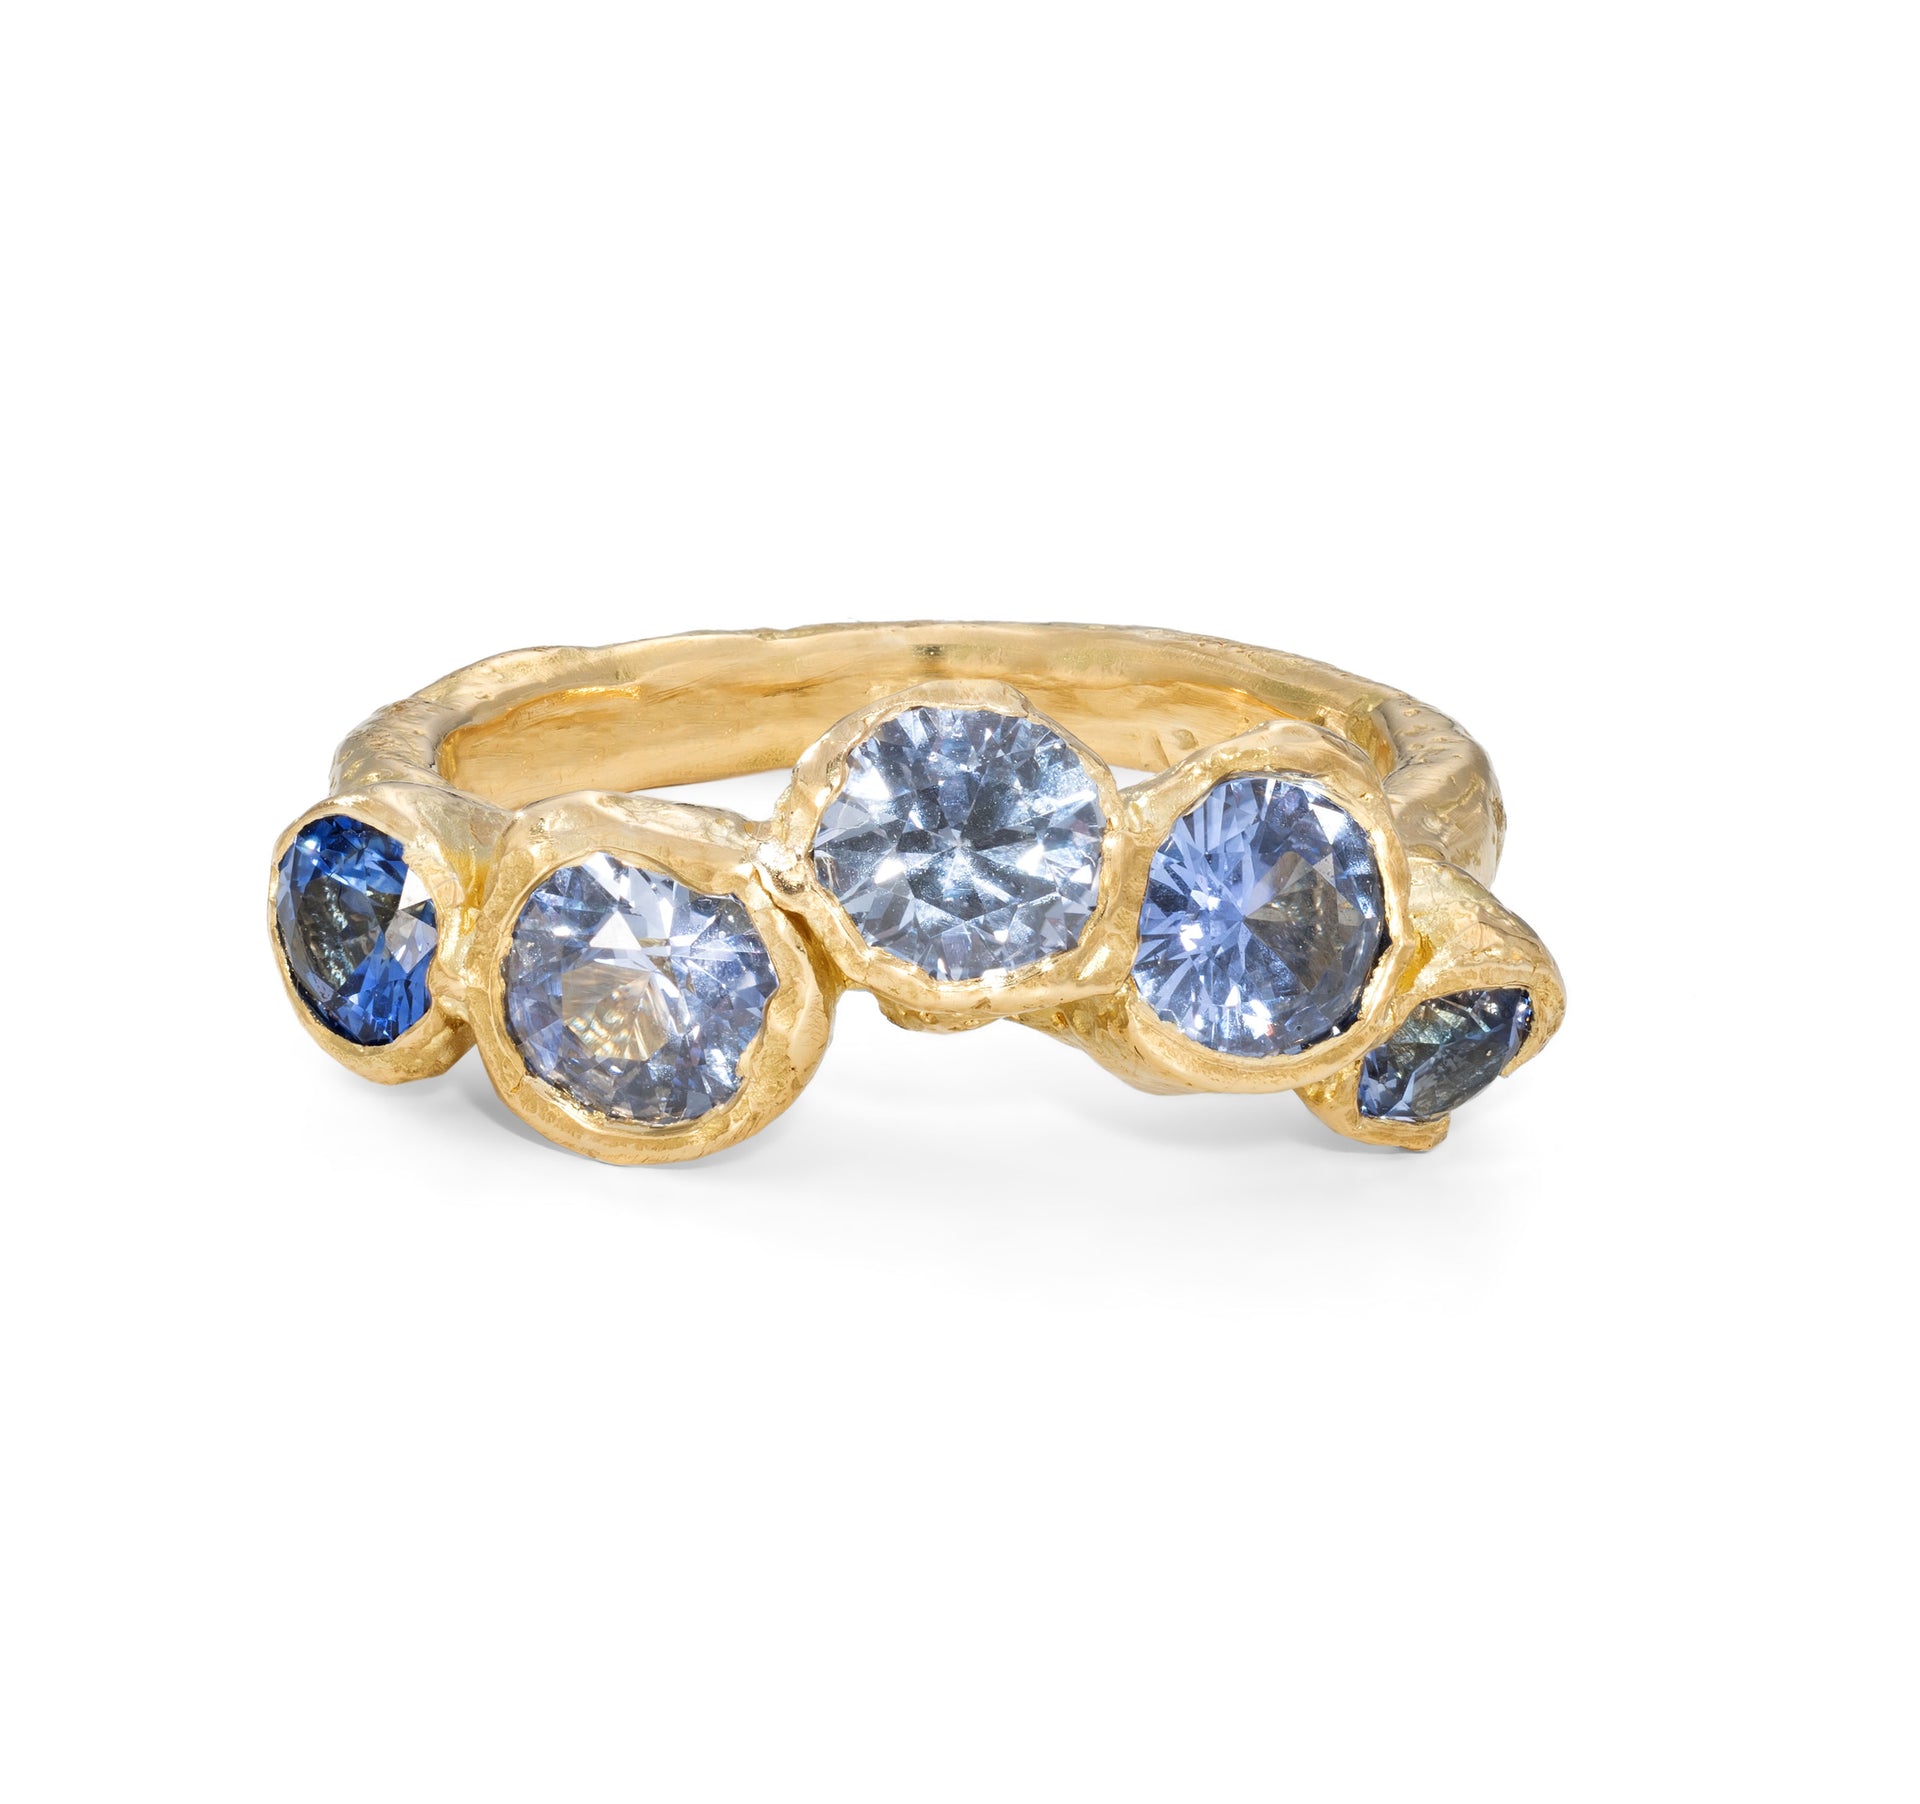 A statement ring of cornflower blue sapphires set in 18ct yellow gold.